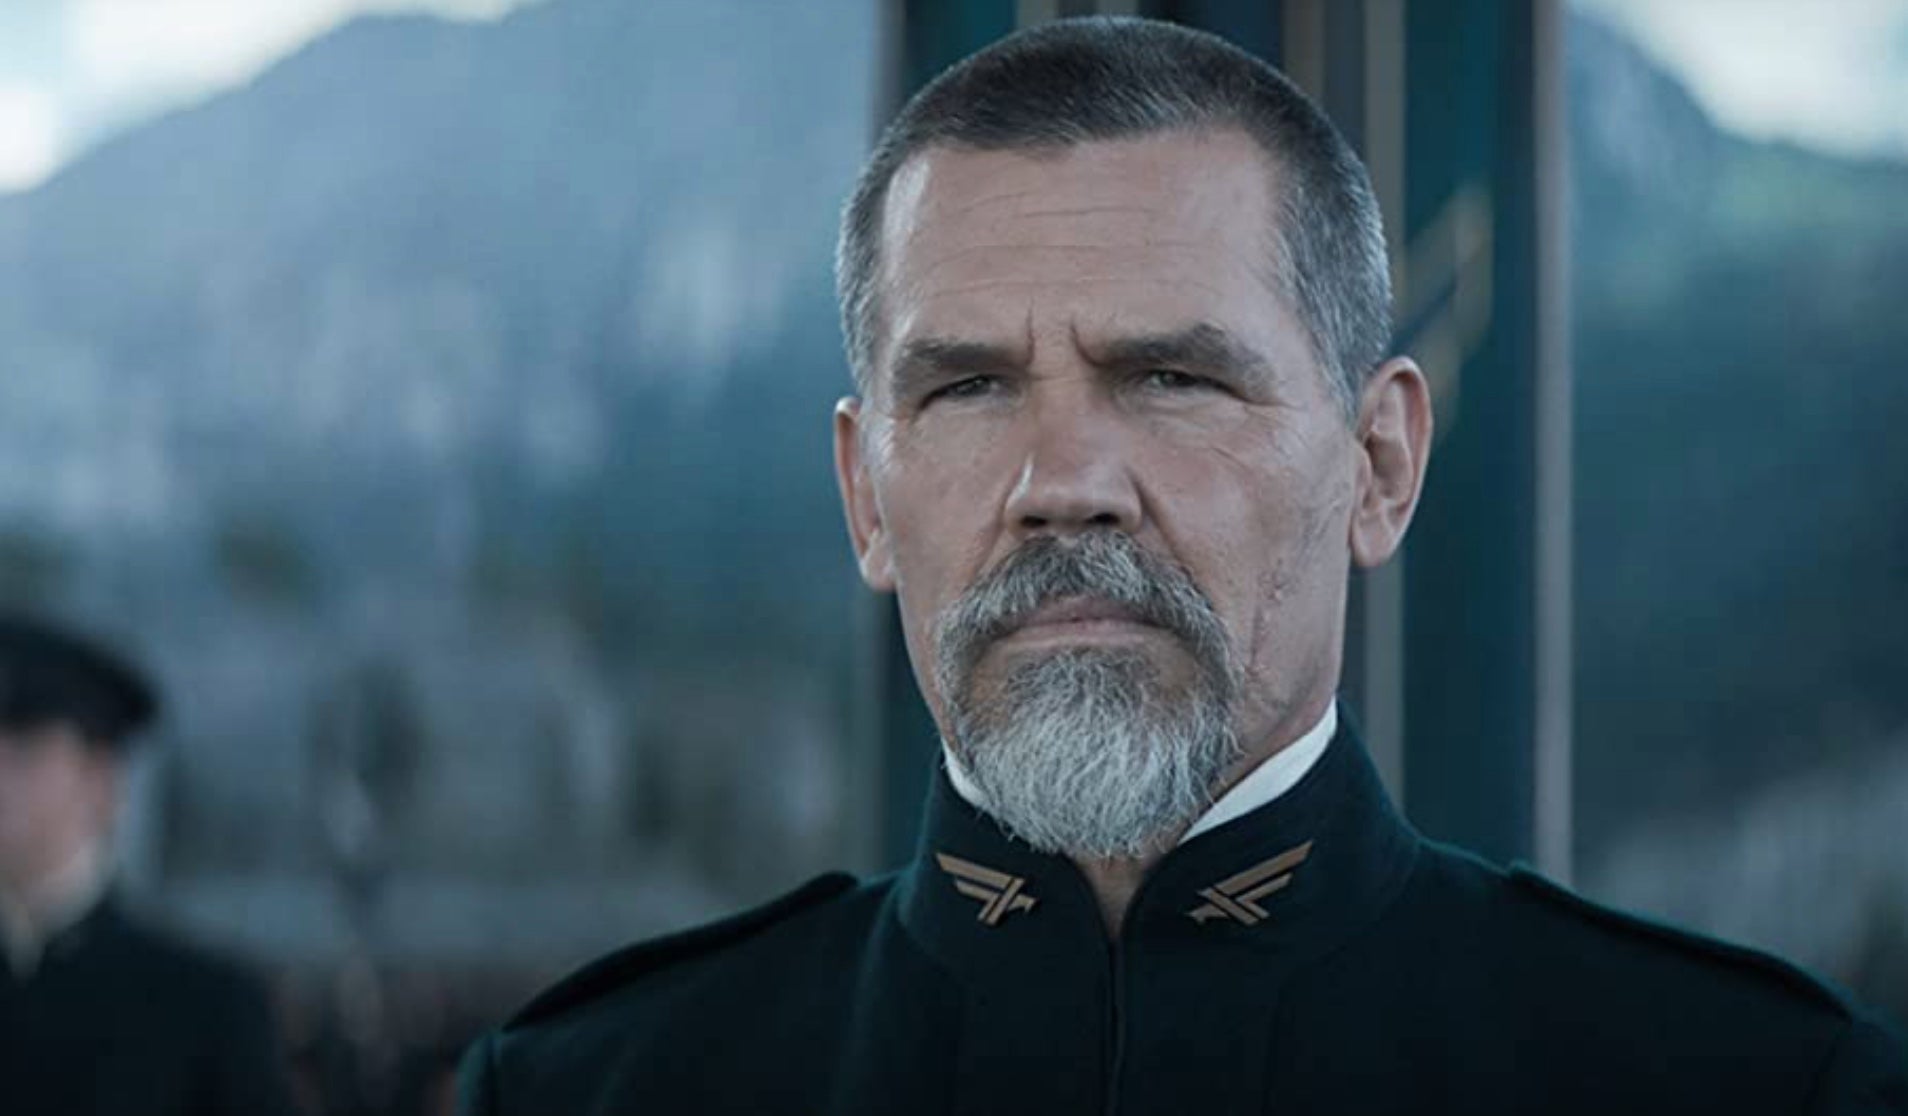 Josh Brolin's Gurney Halleck disappeared in part one, but he'll be back. (Image: Warner Bros.)